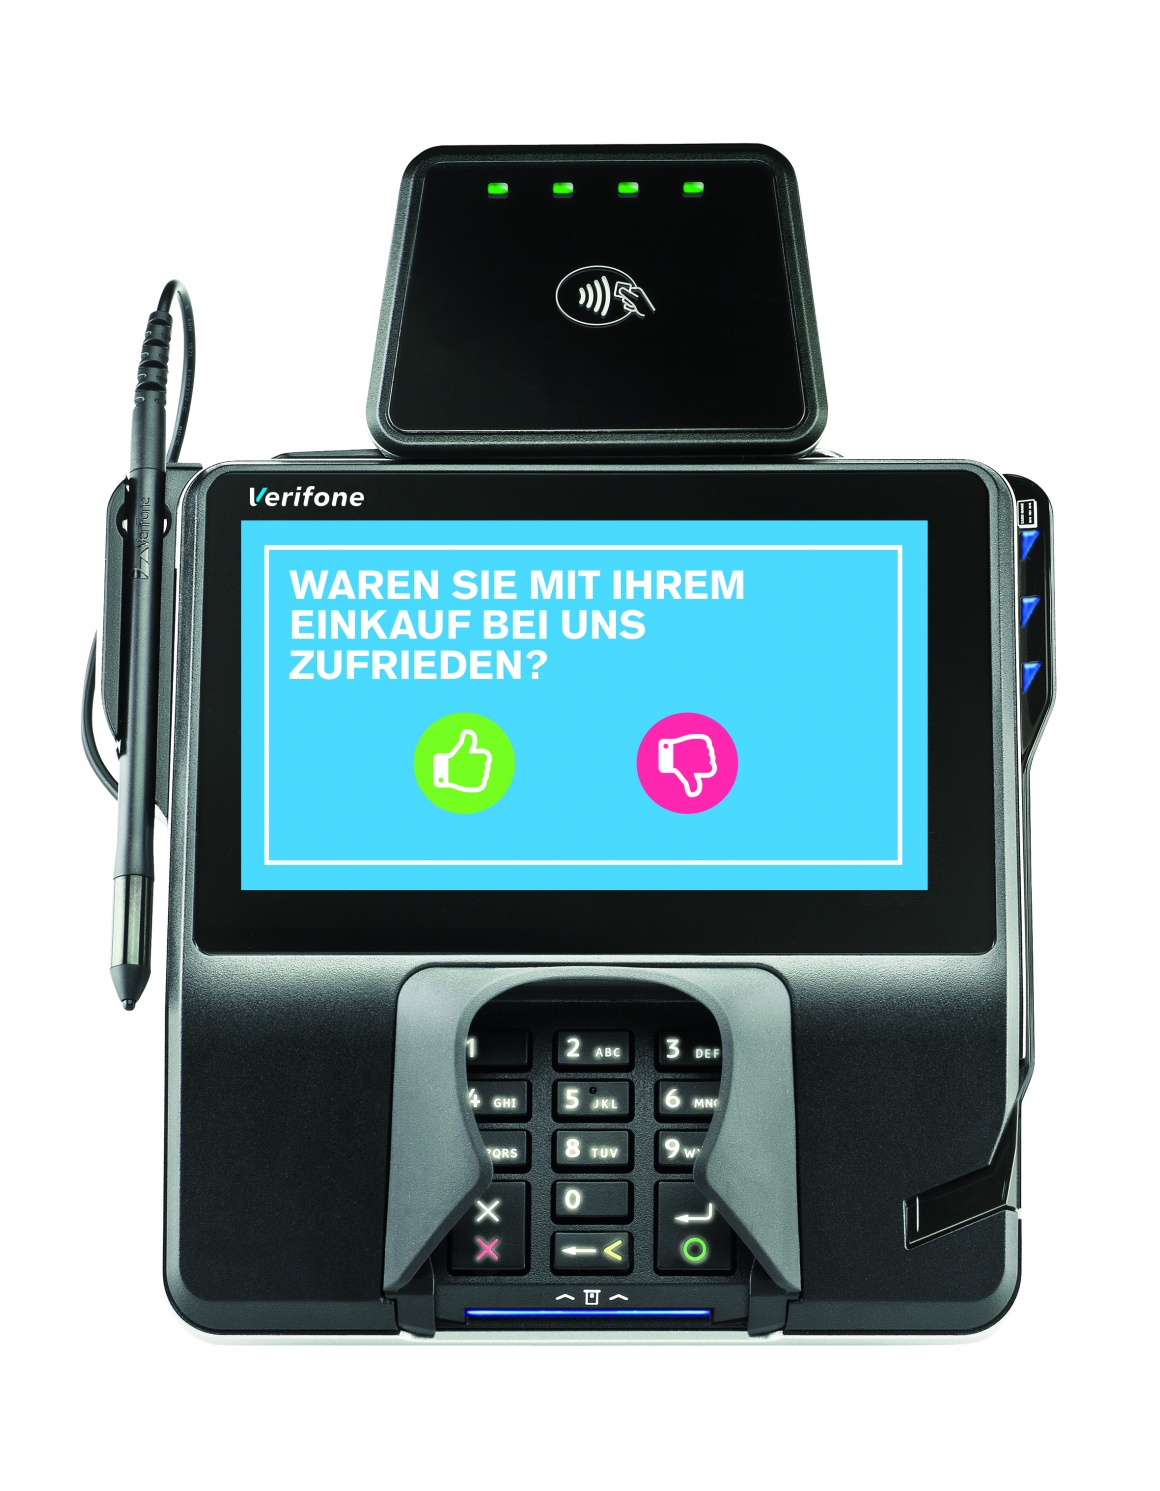 Verifone At The Euroshop 2017 Solutions For The Connected World